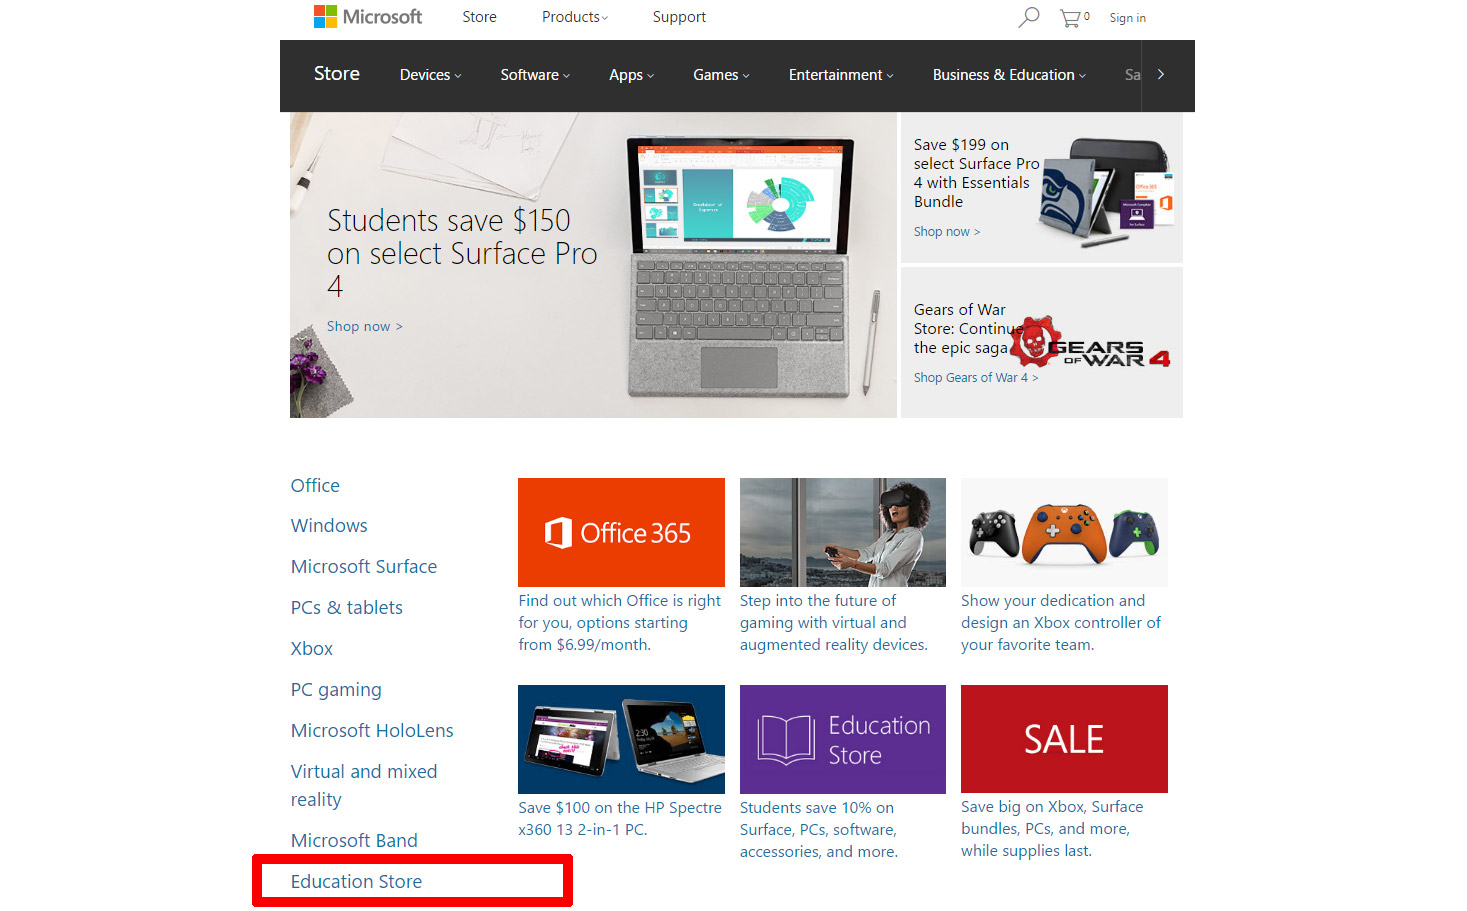 microsoft removes lumia smartphones from store homepage